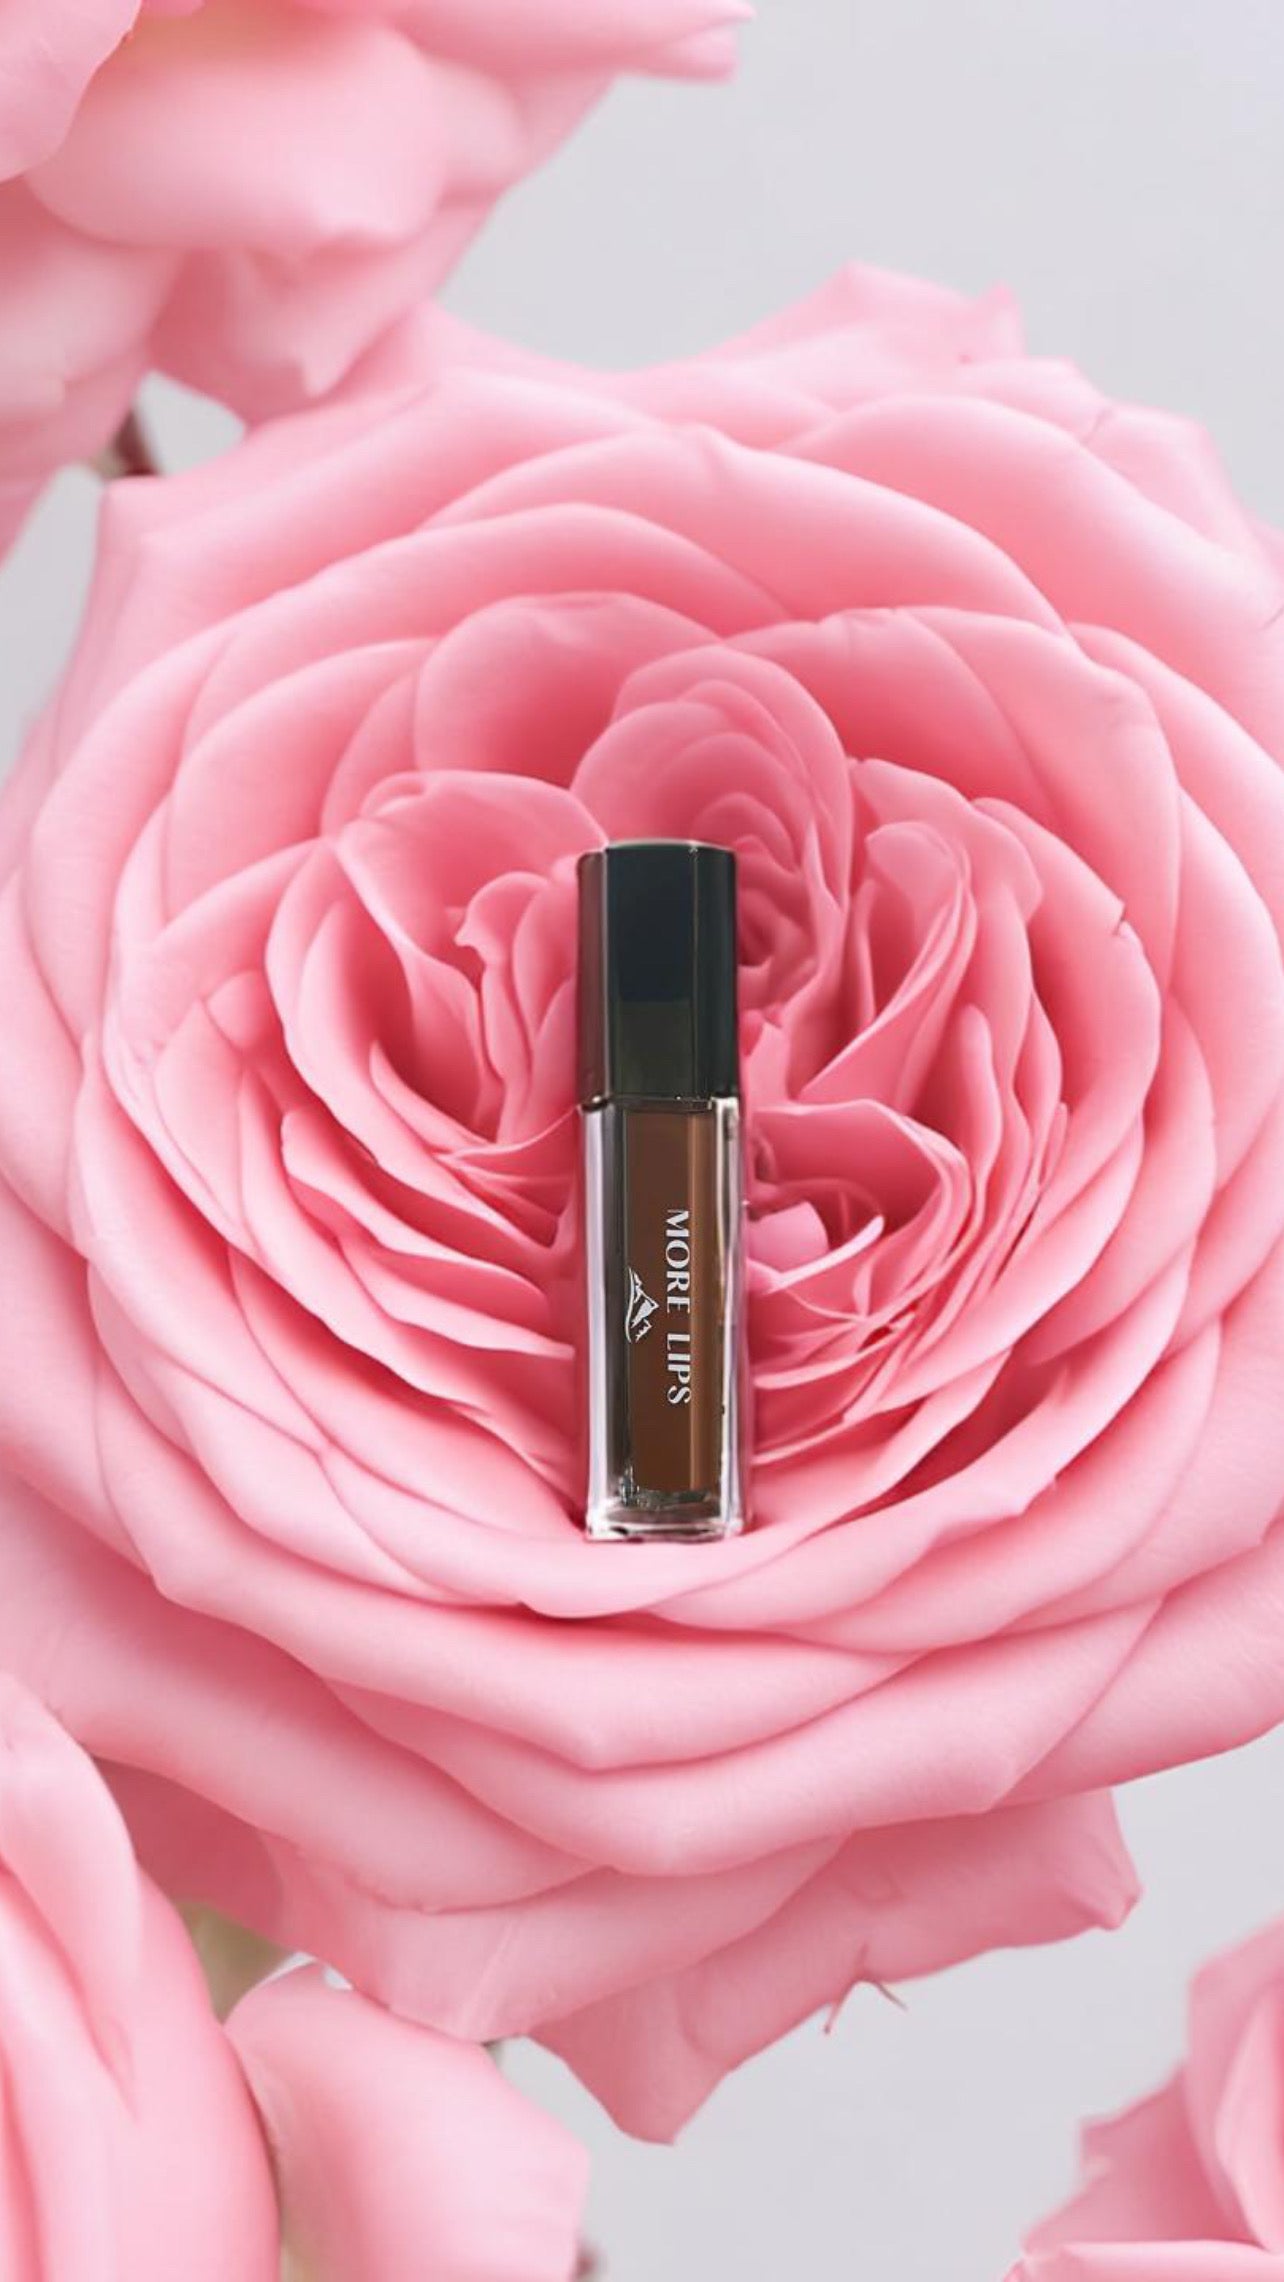 High-Shine Vegan Lip Gloss in L13 featuring a subtle shimmer and a natural color for an understated glam.